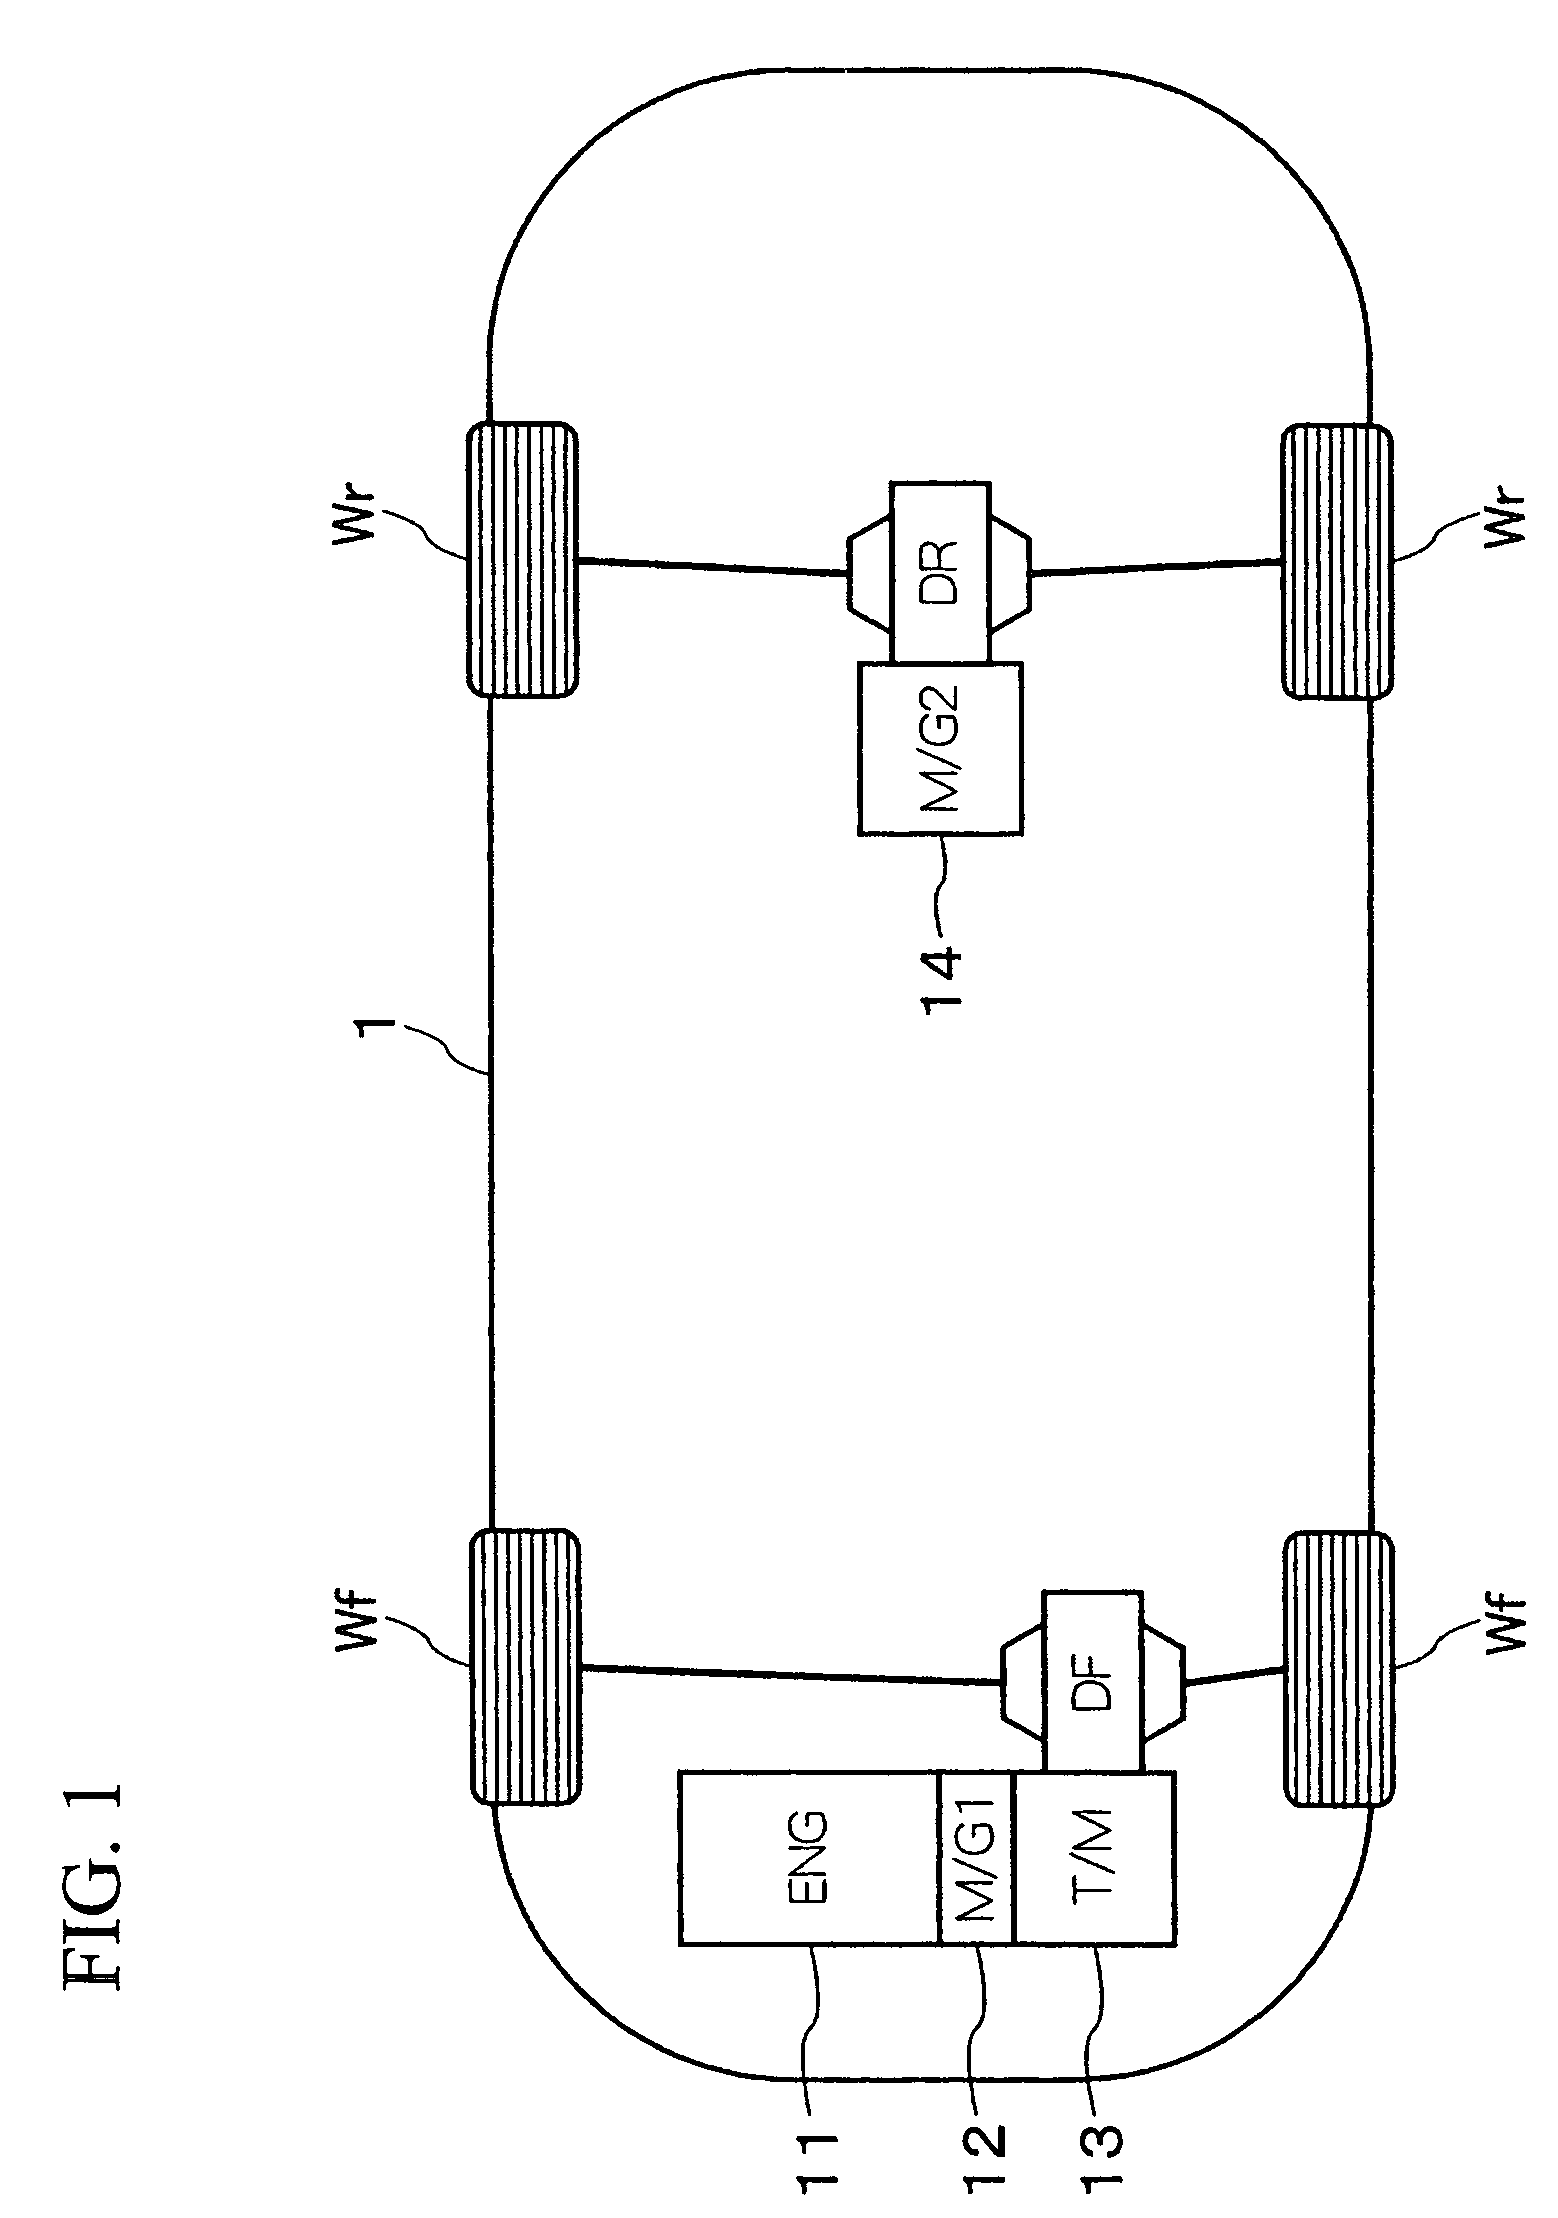 Power control apparatus for hybrid vehicle